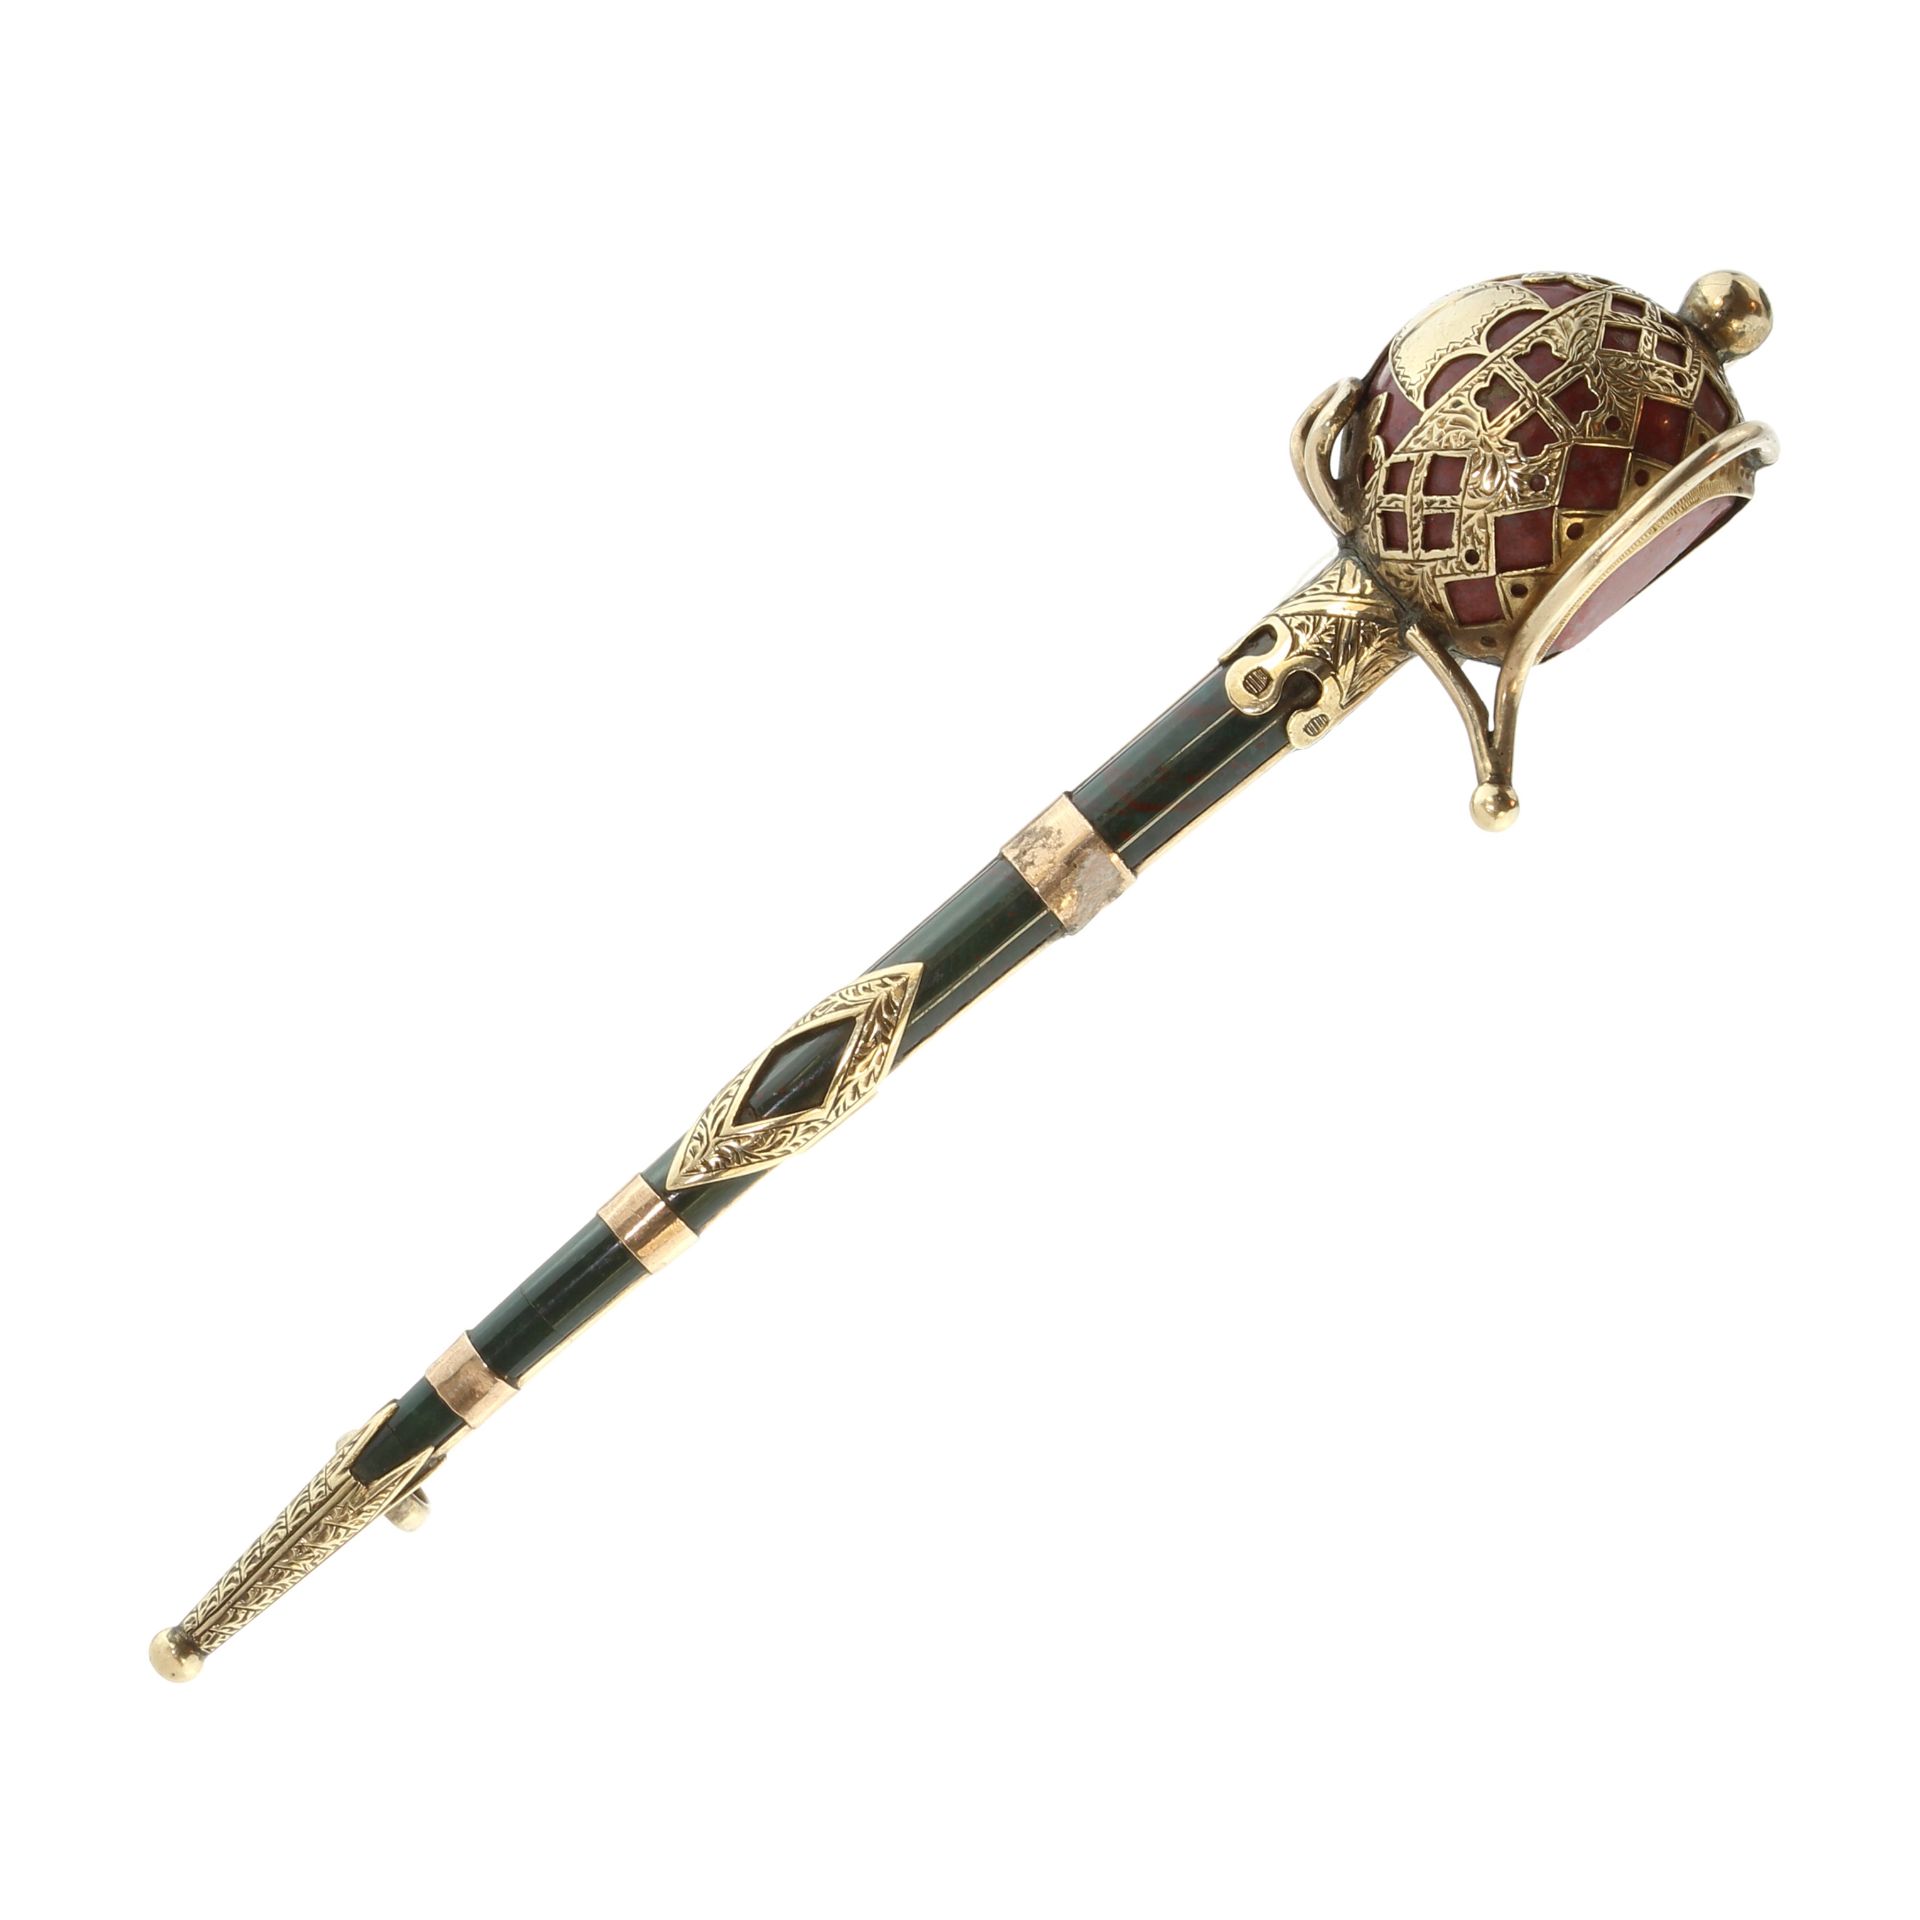 An antique agate and bloodstone sword brooch in high carat yellow gold designed to depict a sword